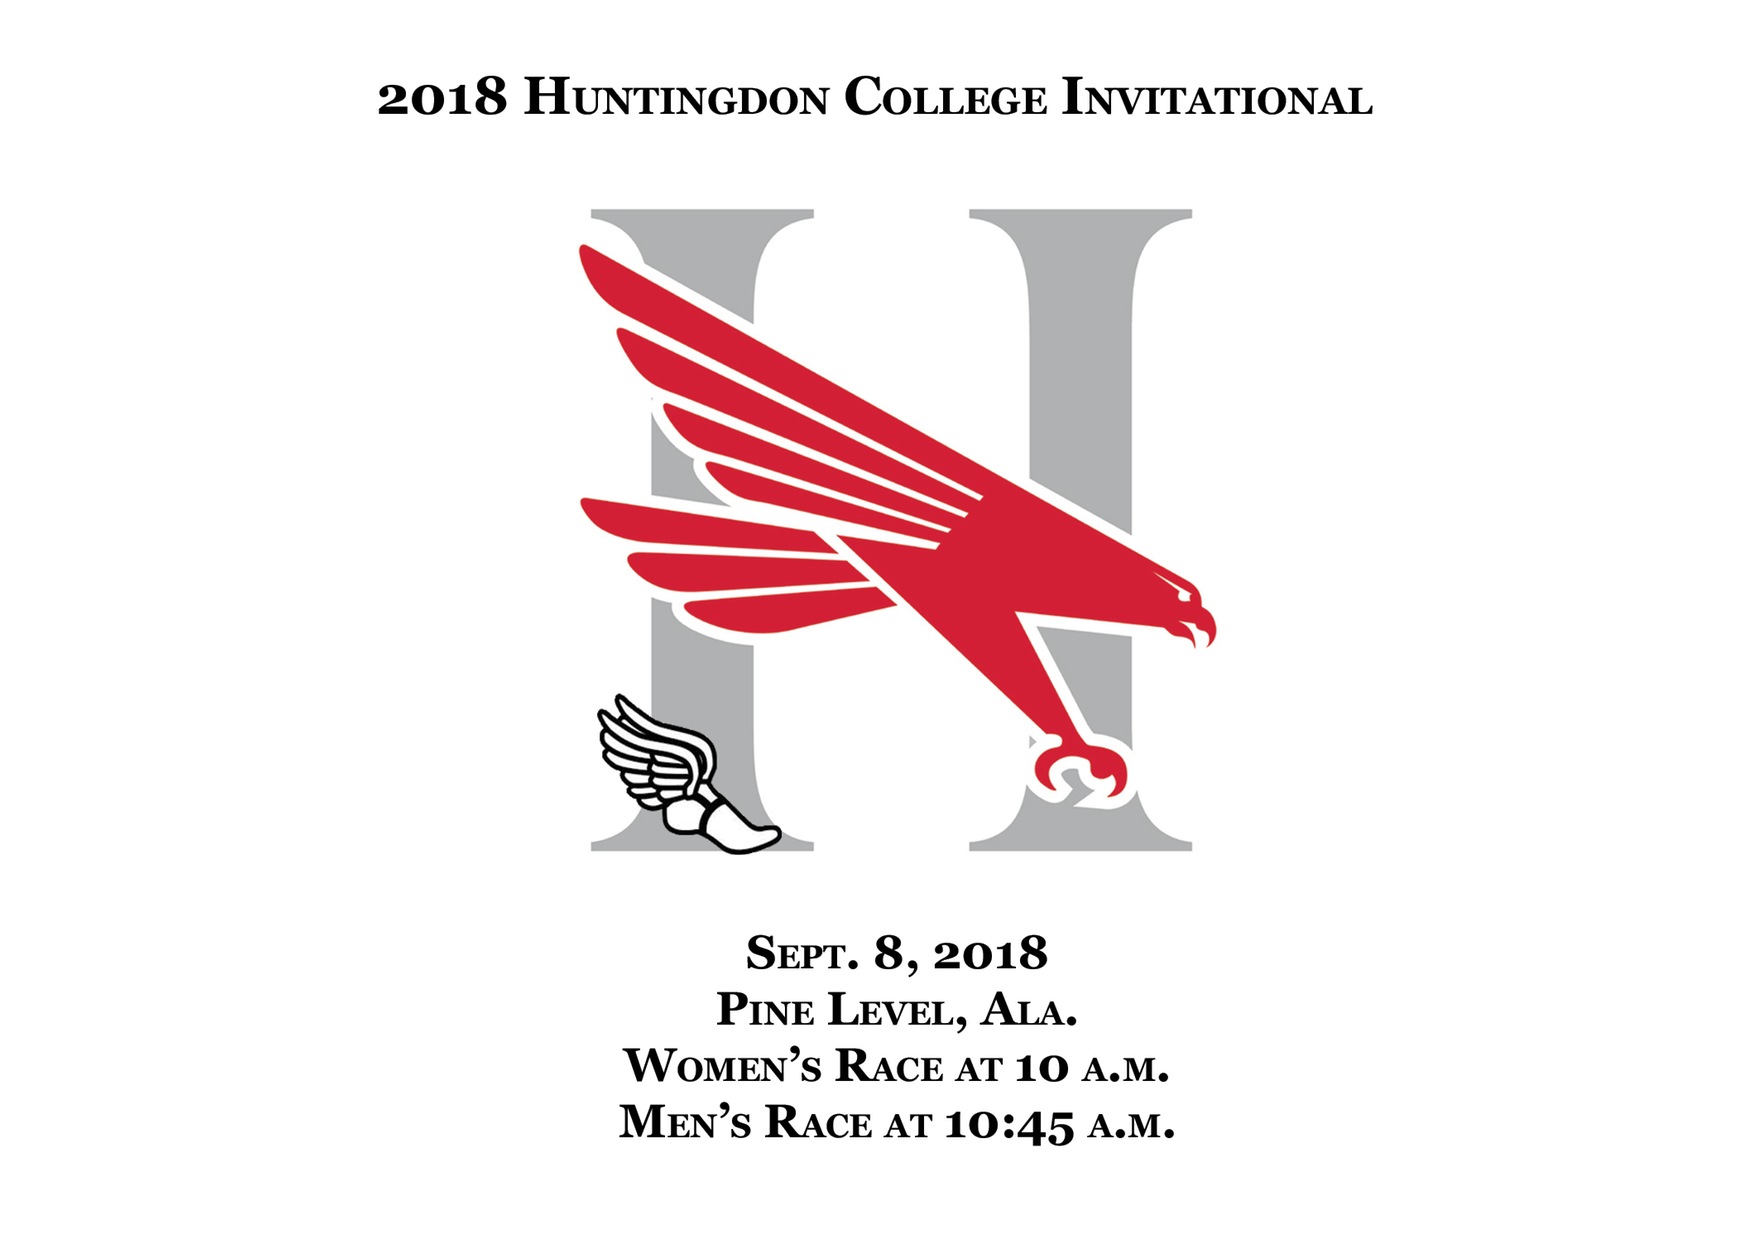 Huntingdon to host first cross country meet